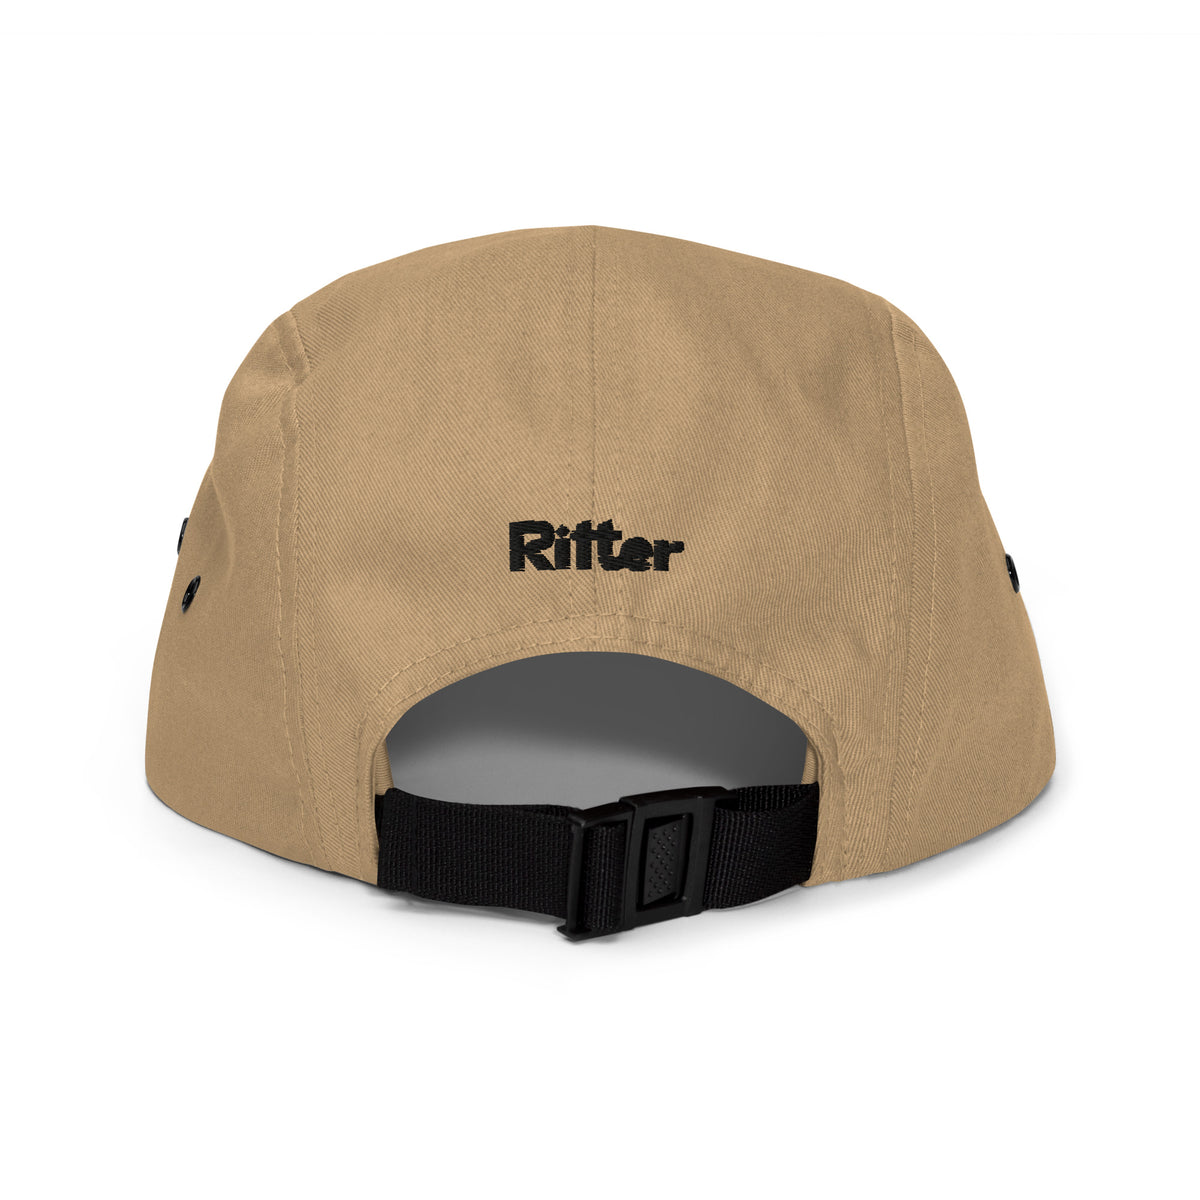 Ritter Five Panel Cap - &quot;Wool To The Wise&quot;